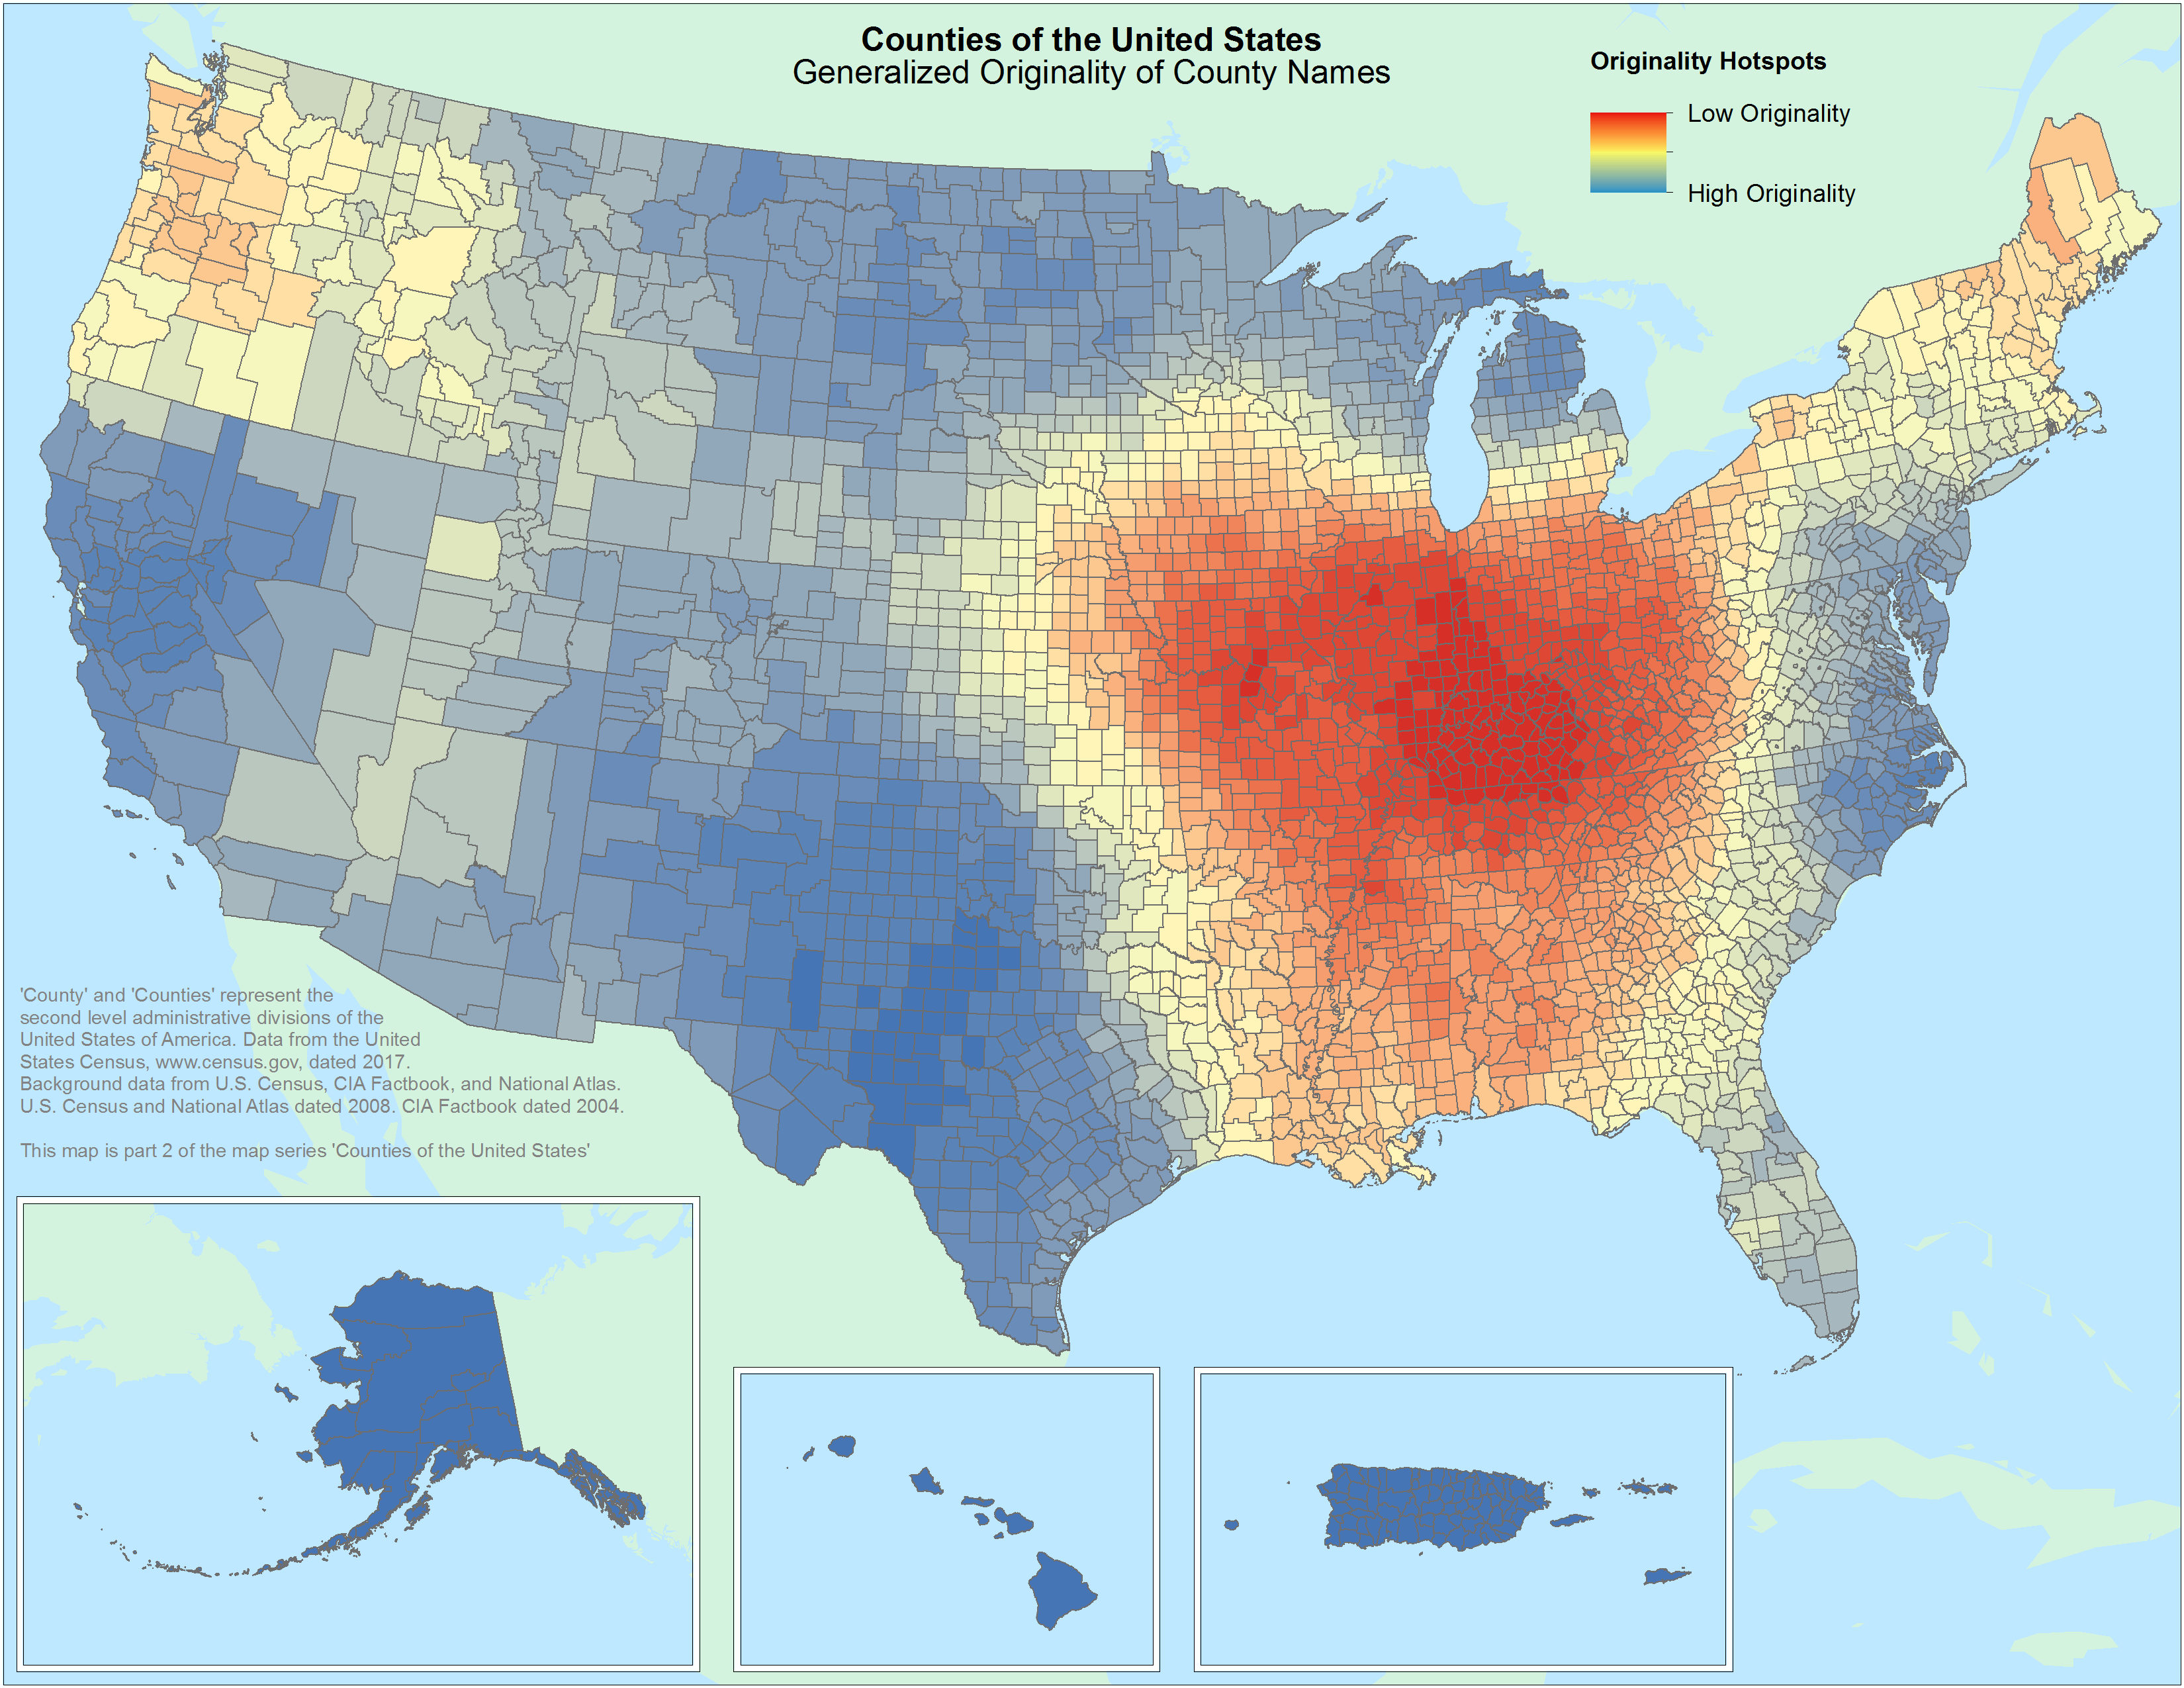 Hotspot Visualization Of Unoriginal County Names In The United States 